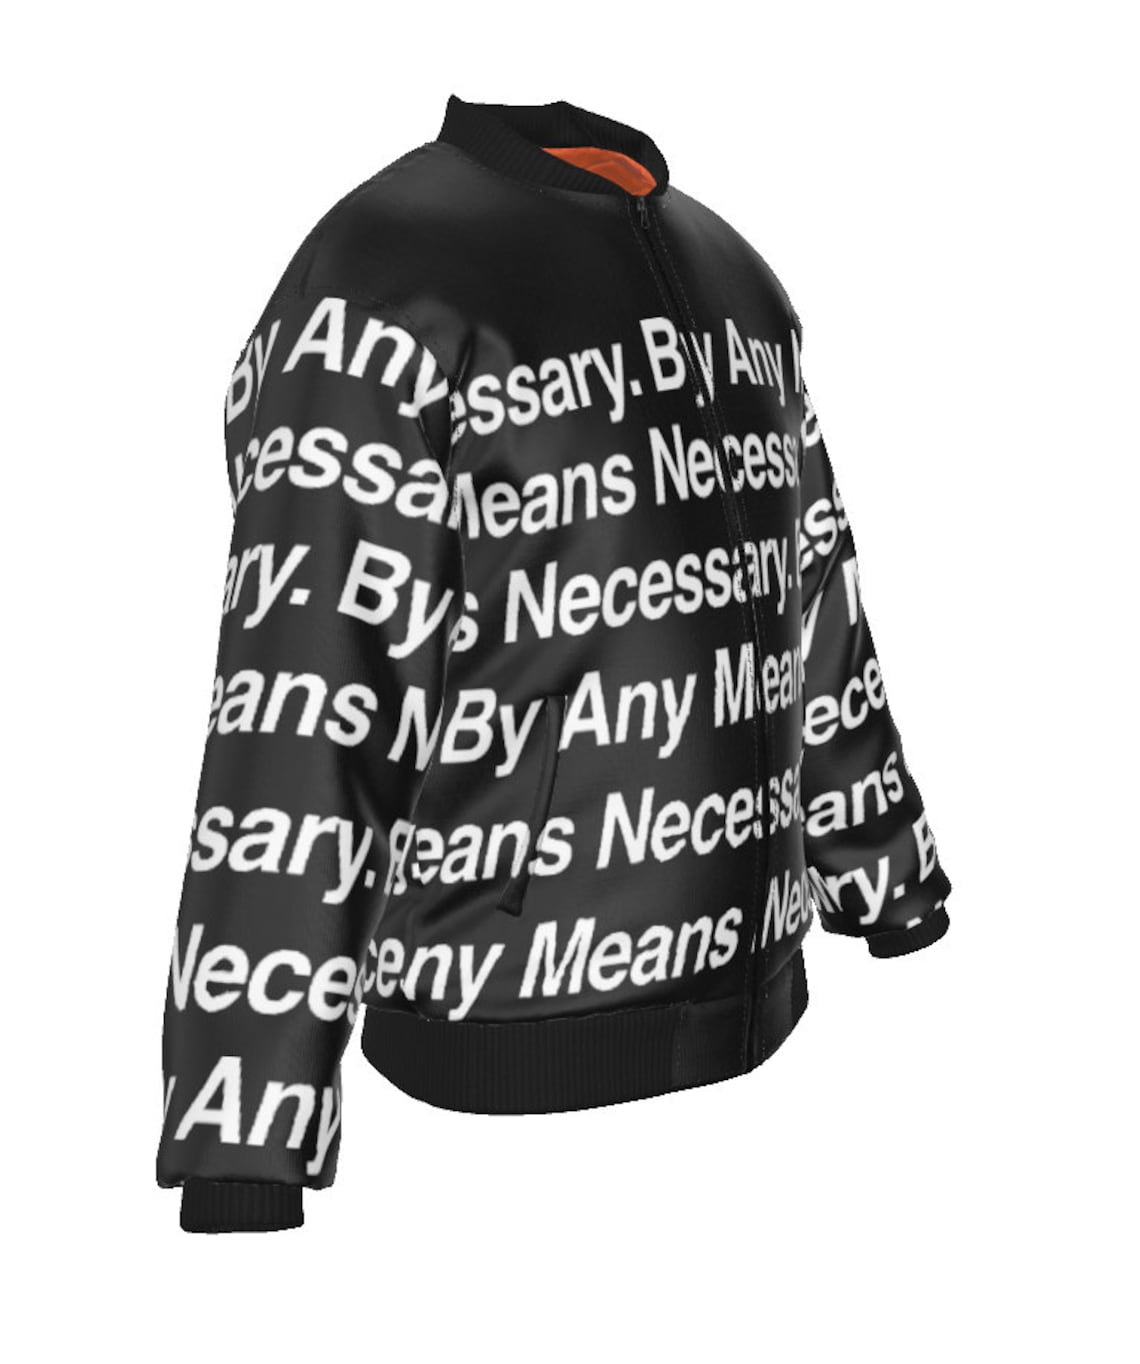 By Any Means Necessary Men's Puffer Jacket - Red - Goku Drip